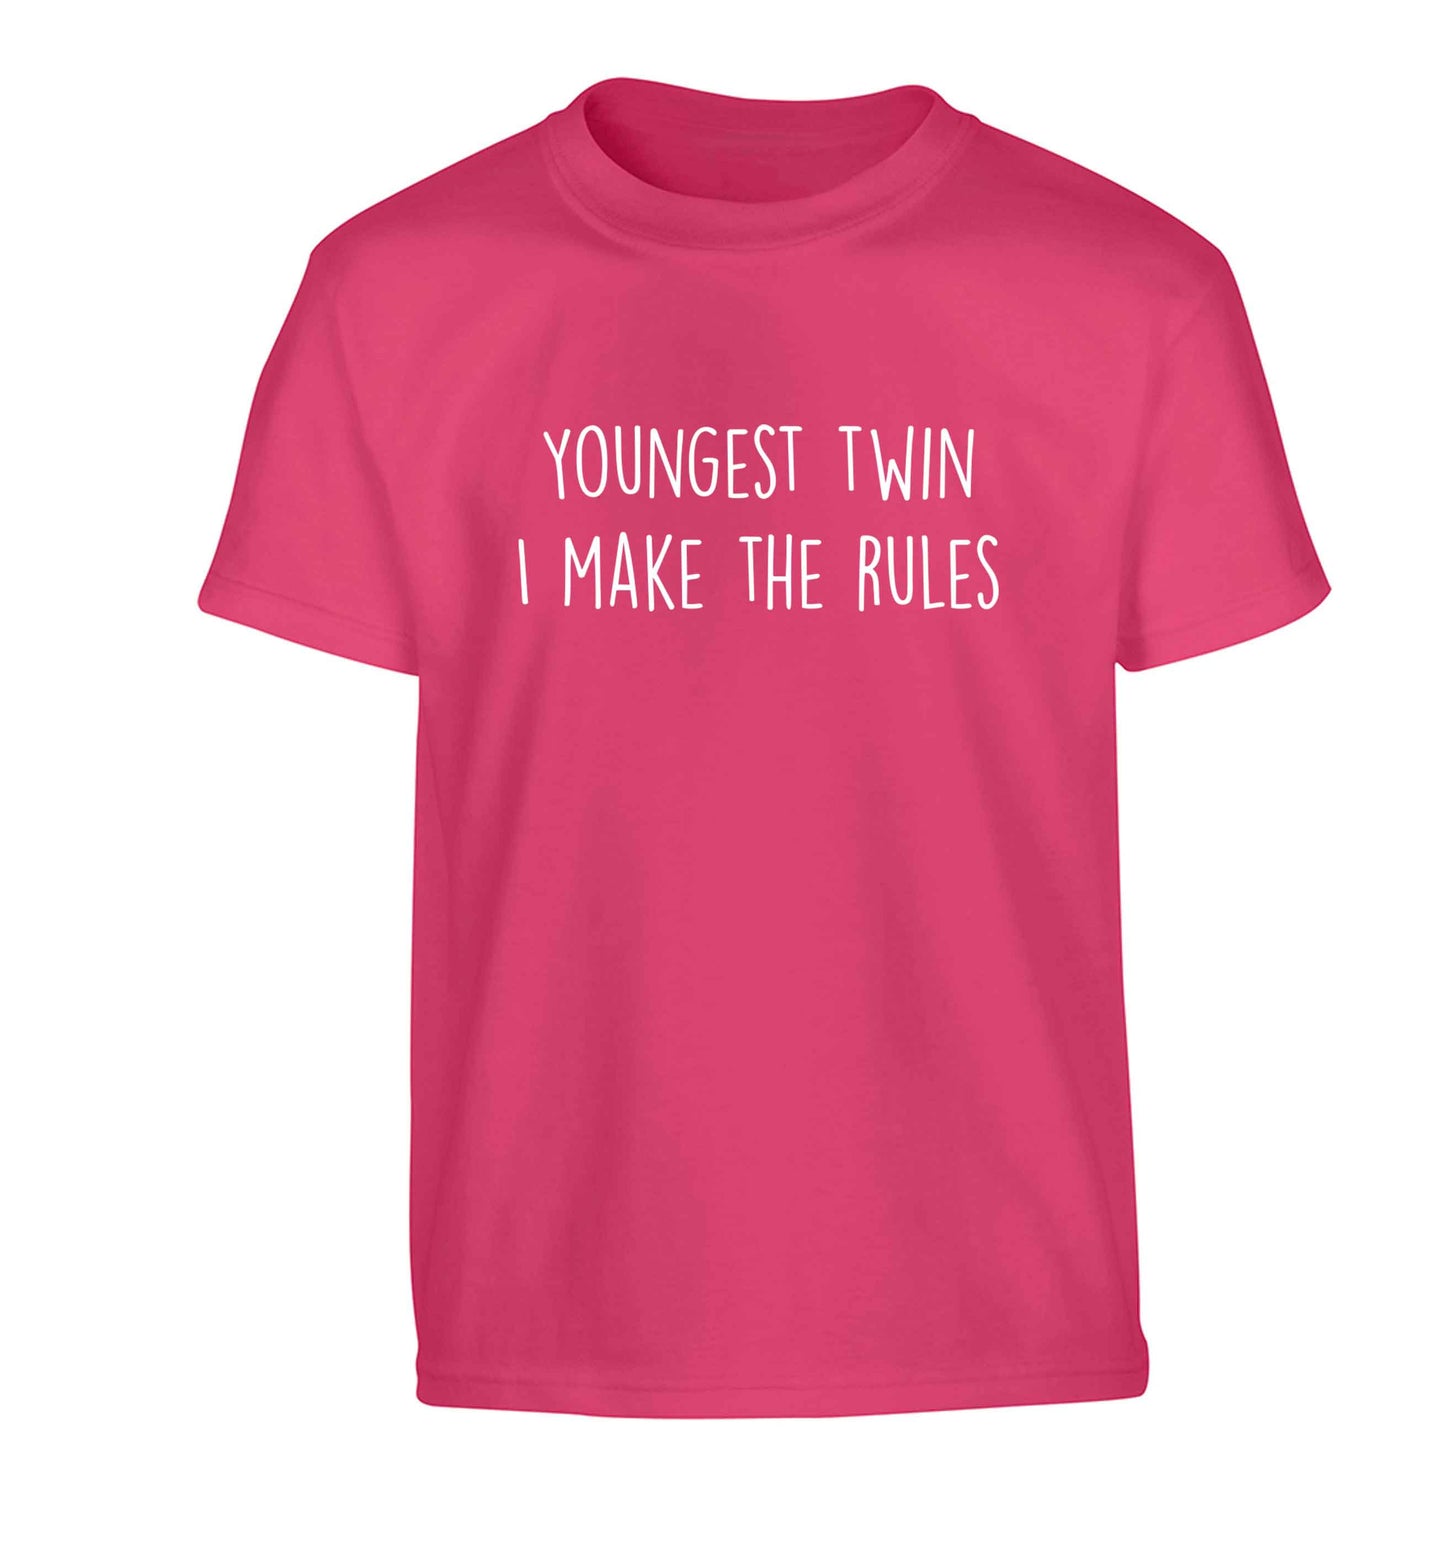 Youngest twin I make the rules Children's pink Tshirt 12-13 Years